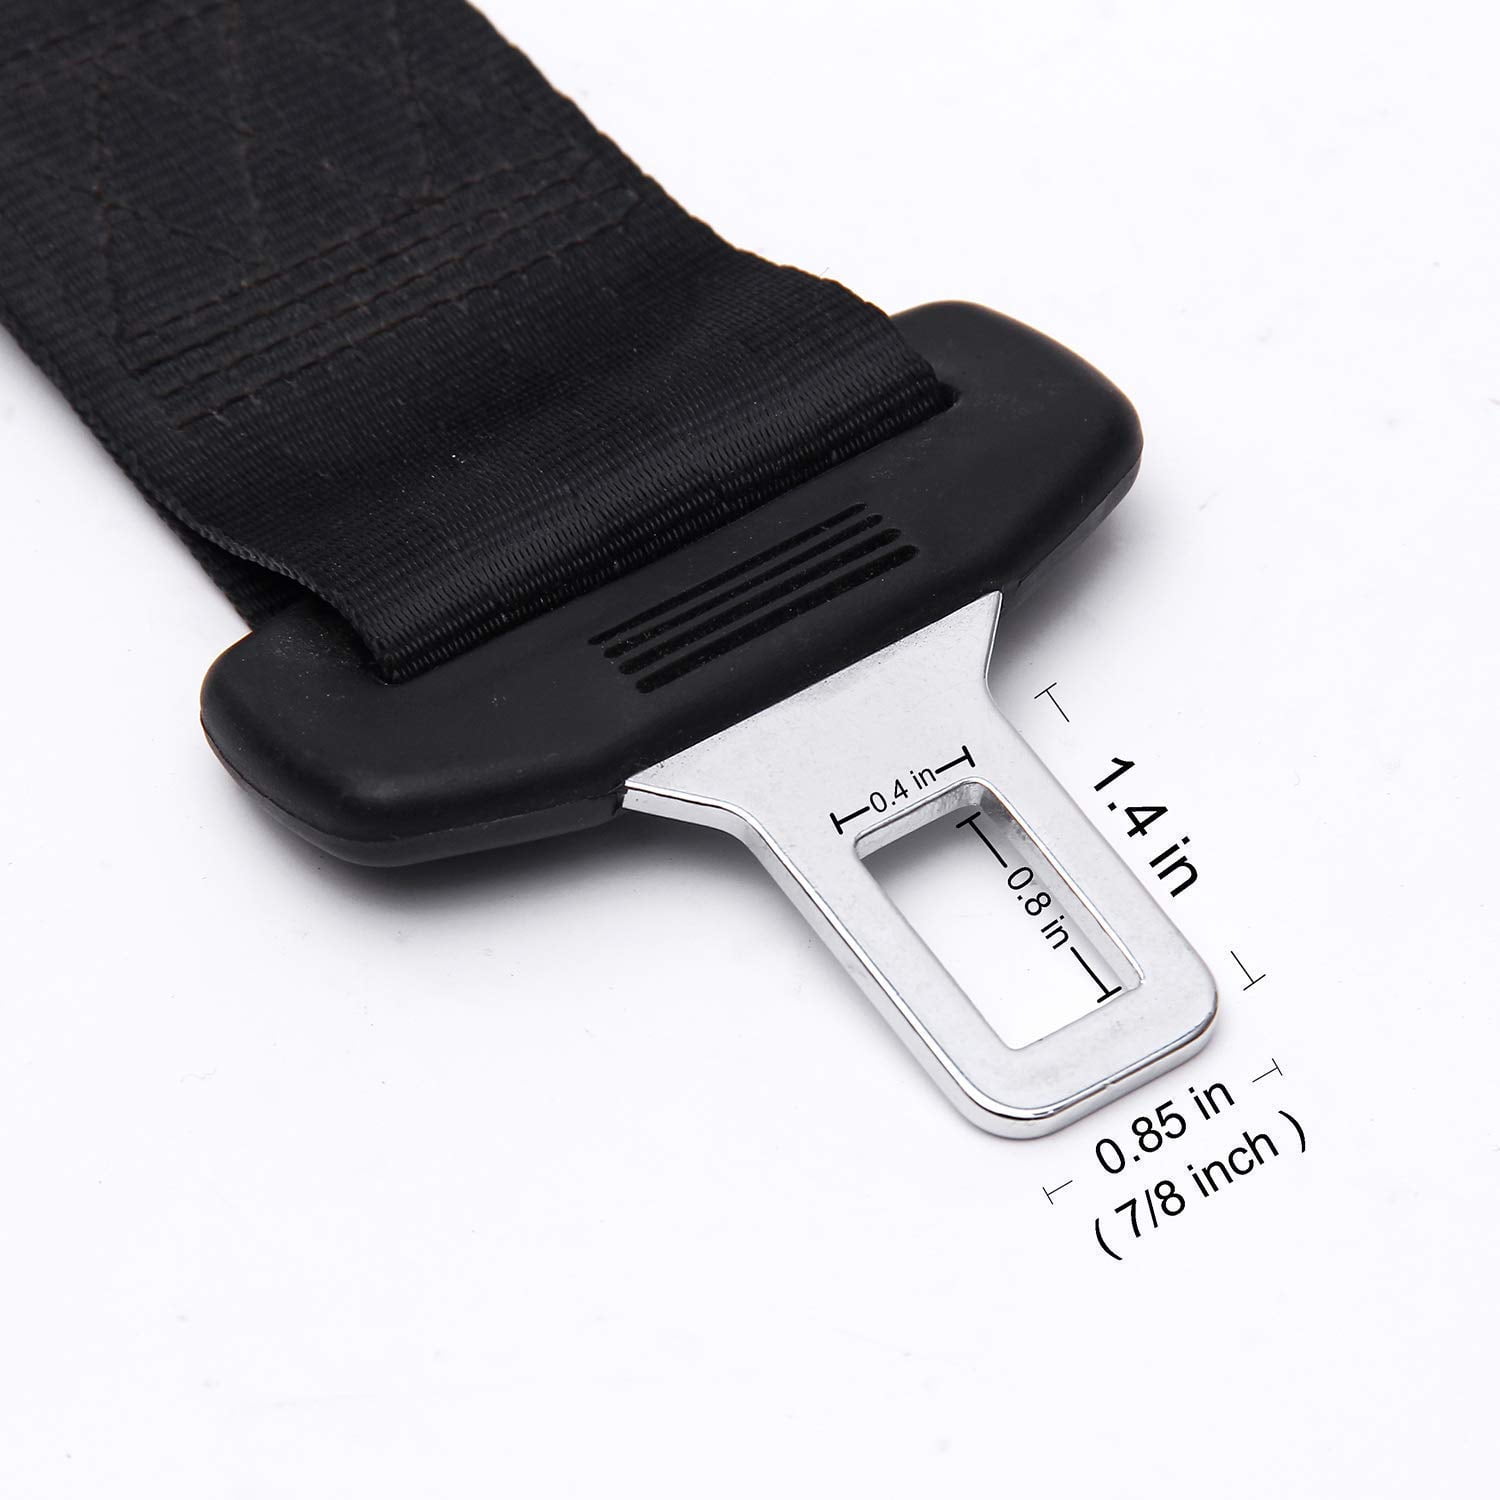 7 Rigid Seat Belt Lengthening Accessory Buckle Up and Drive Safely Again E-Mark Safety Certification 2-Pack with 7/8 Inch Metal Tongue Width